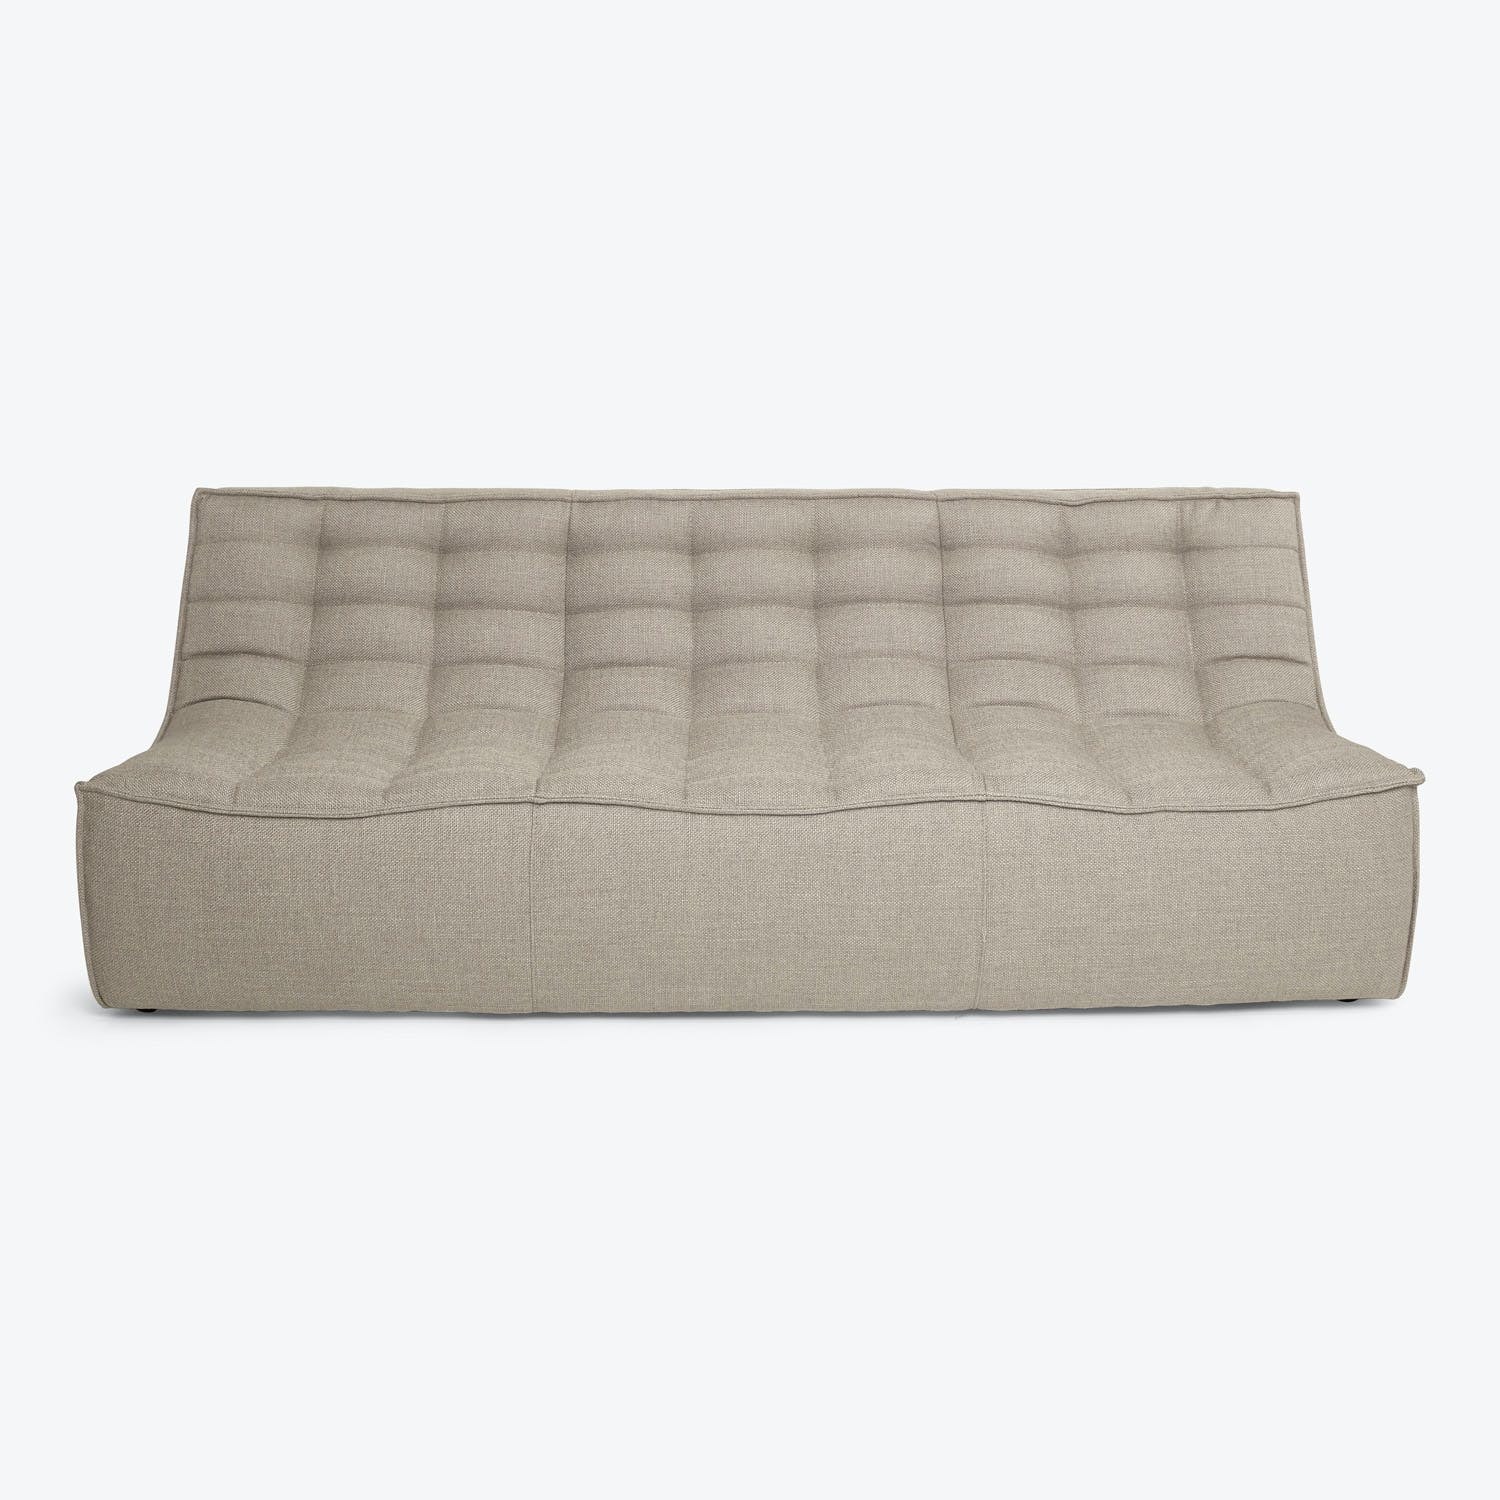 Minimalist modern-style floor couch with tufted upholstery in neutral tone.